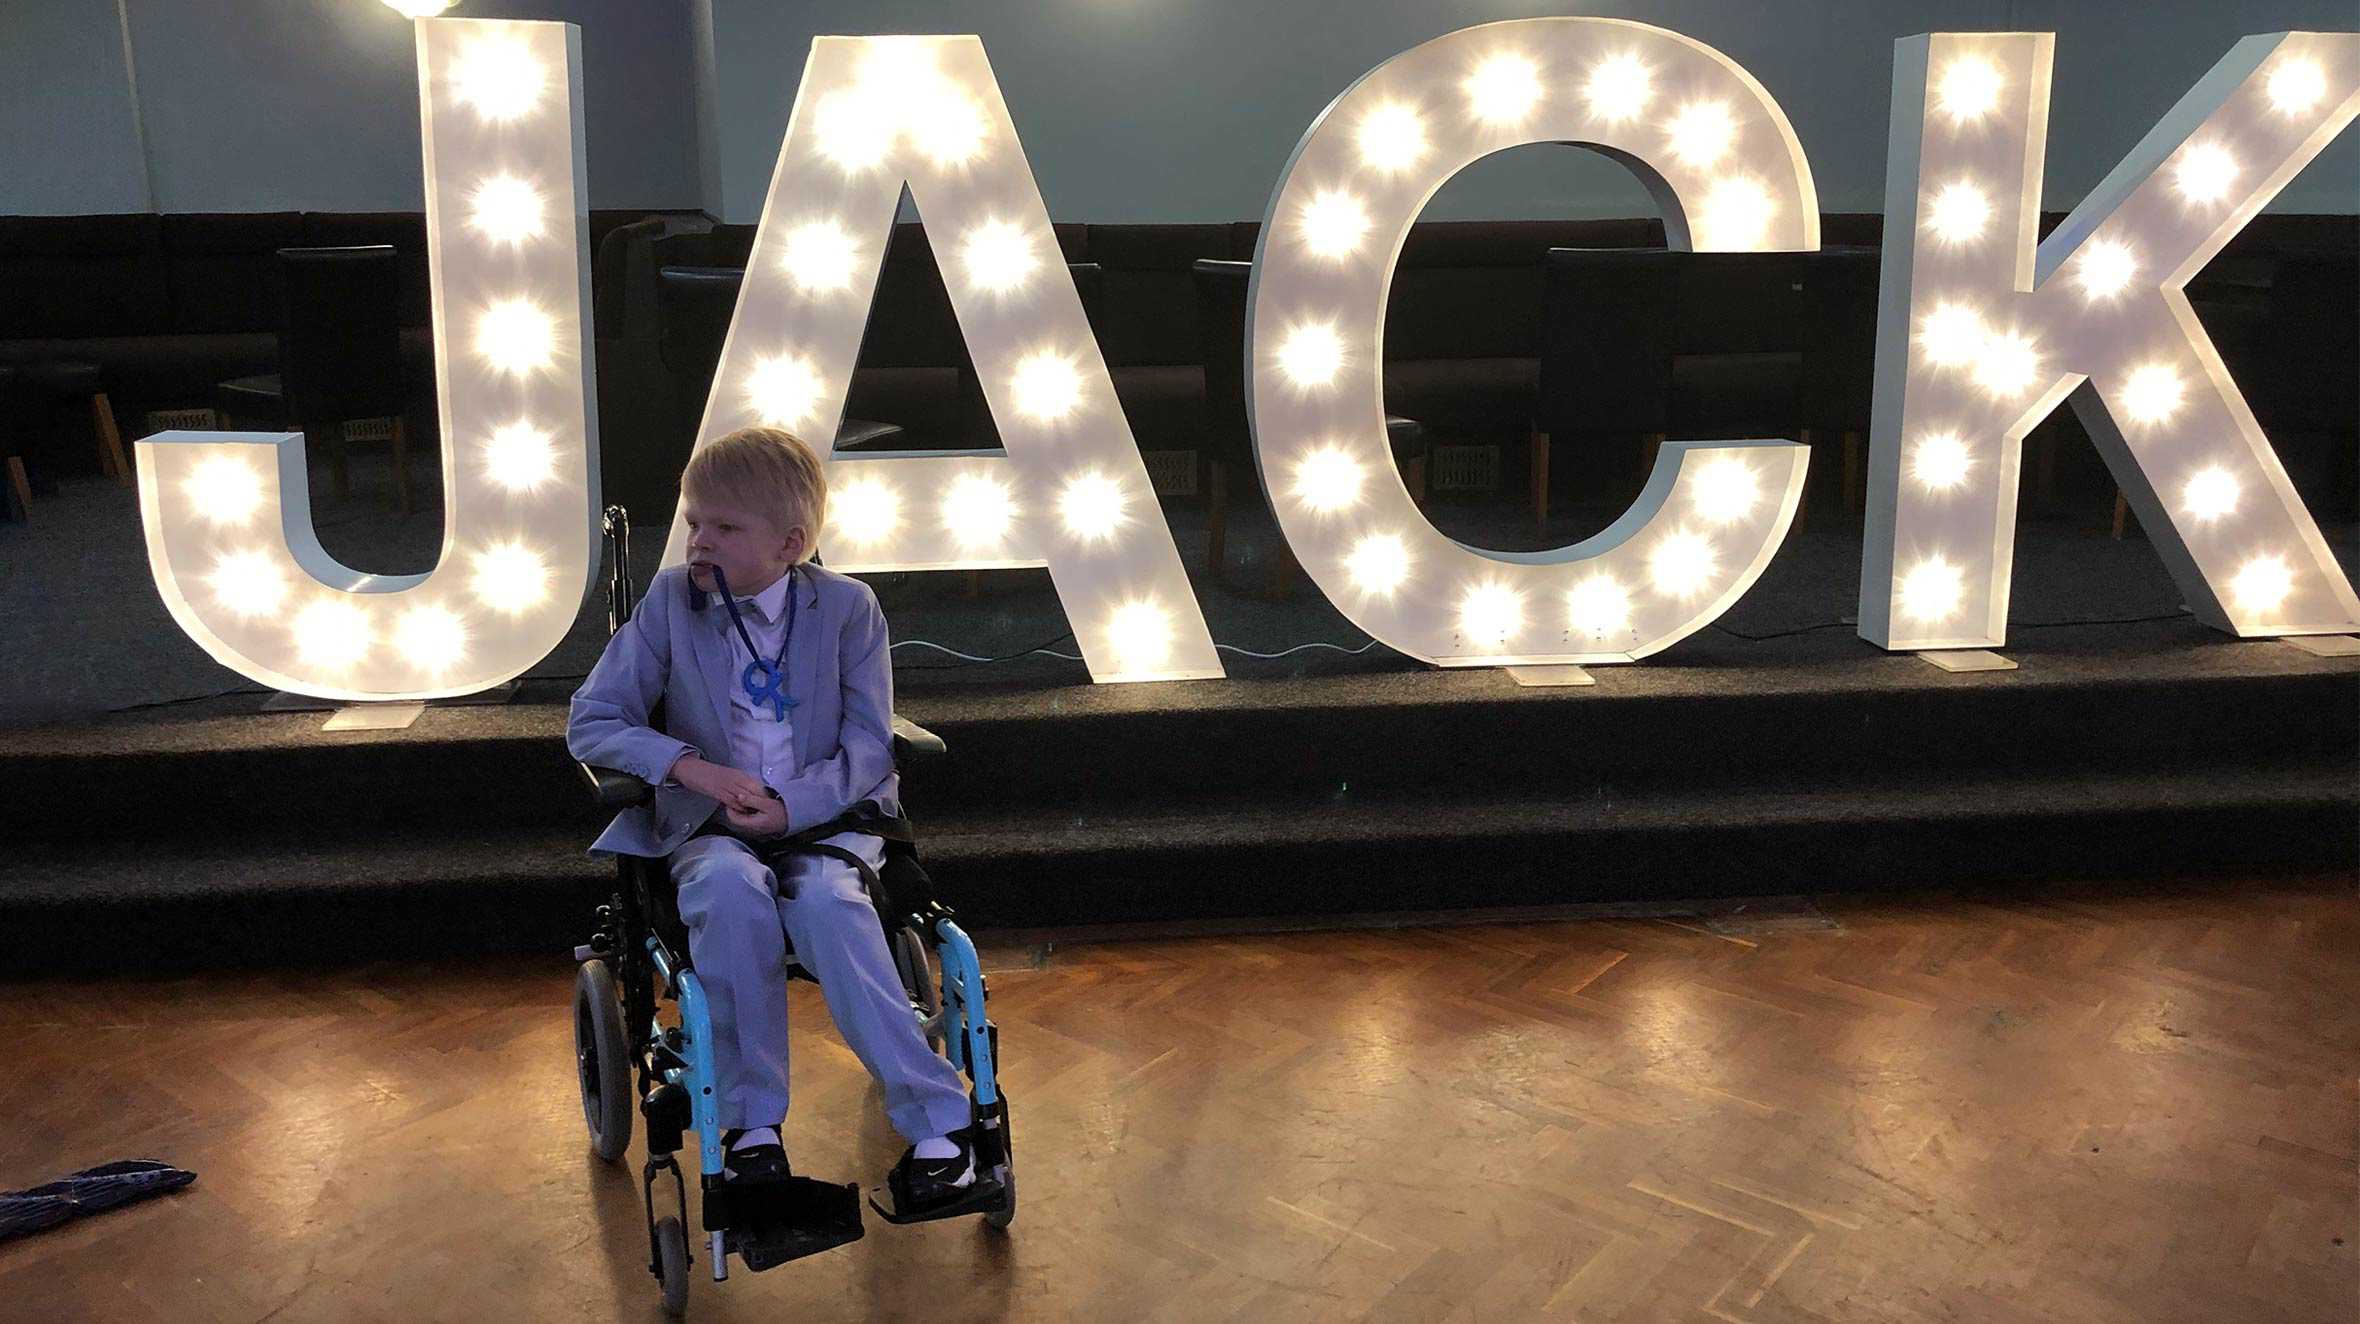 Jack sitting in his wheelchair and wearing a colourful tuxedo, with his name in giant lights behind him.